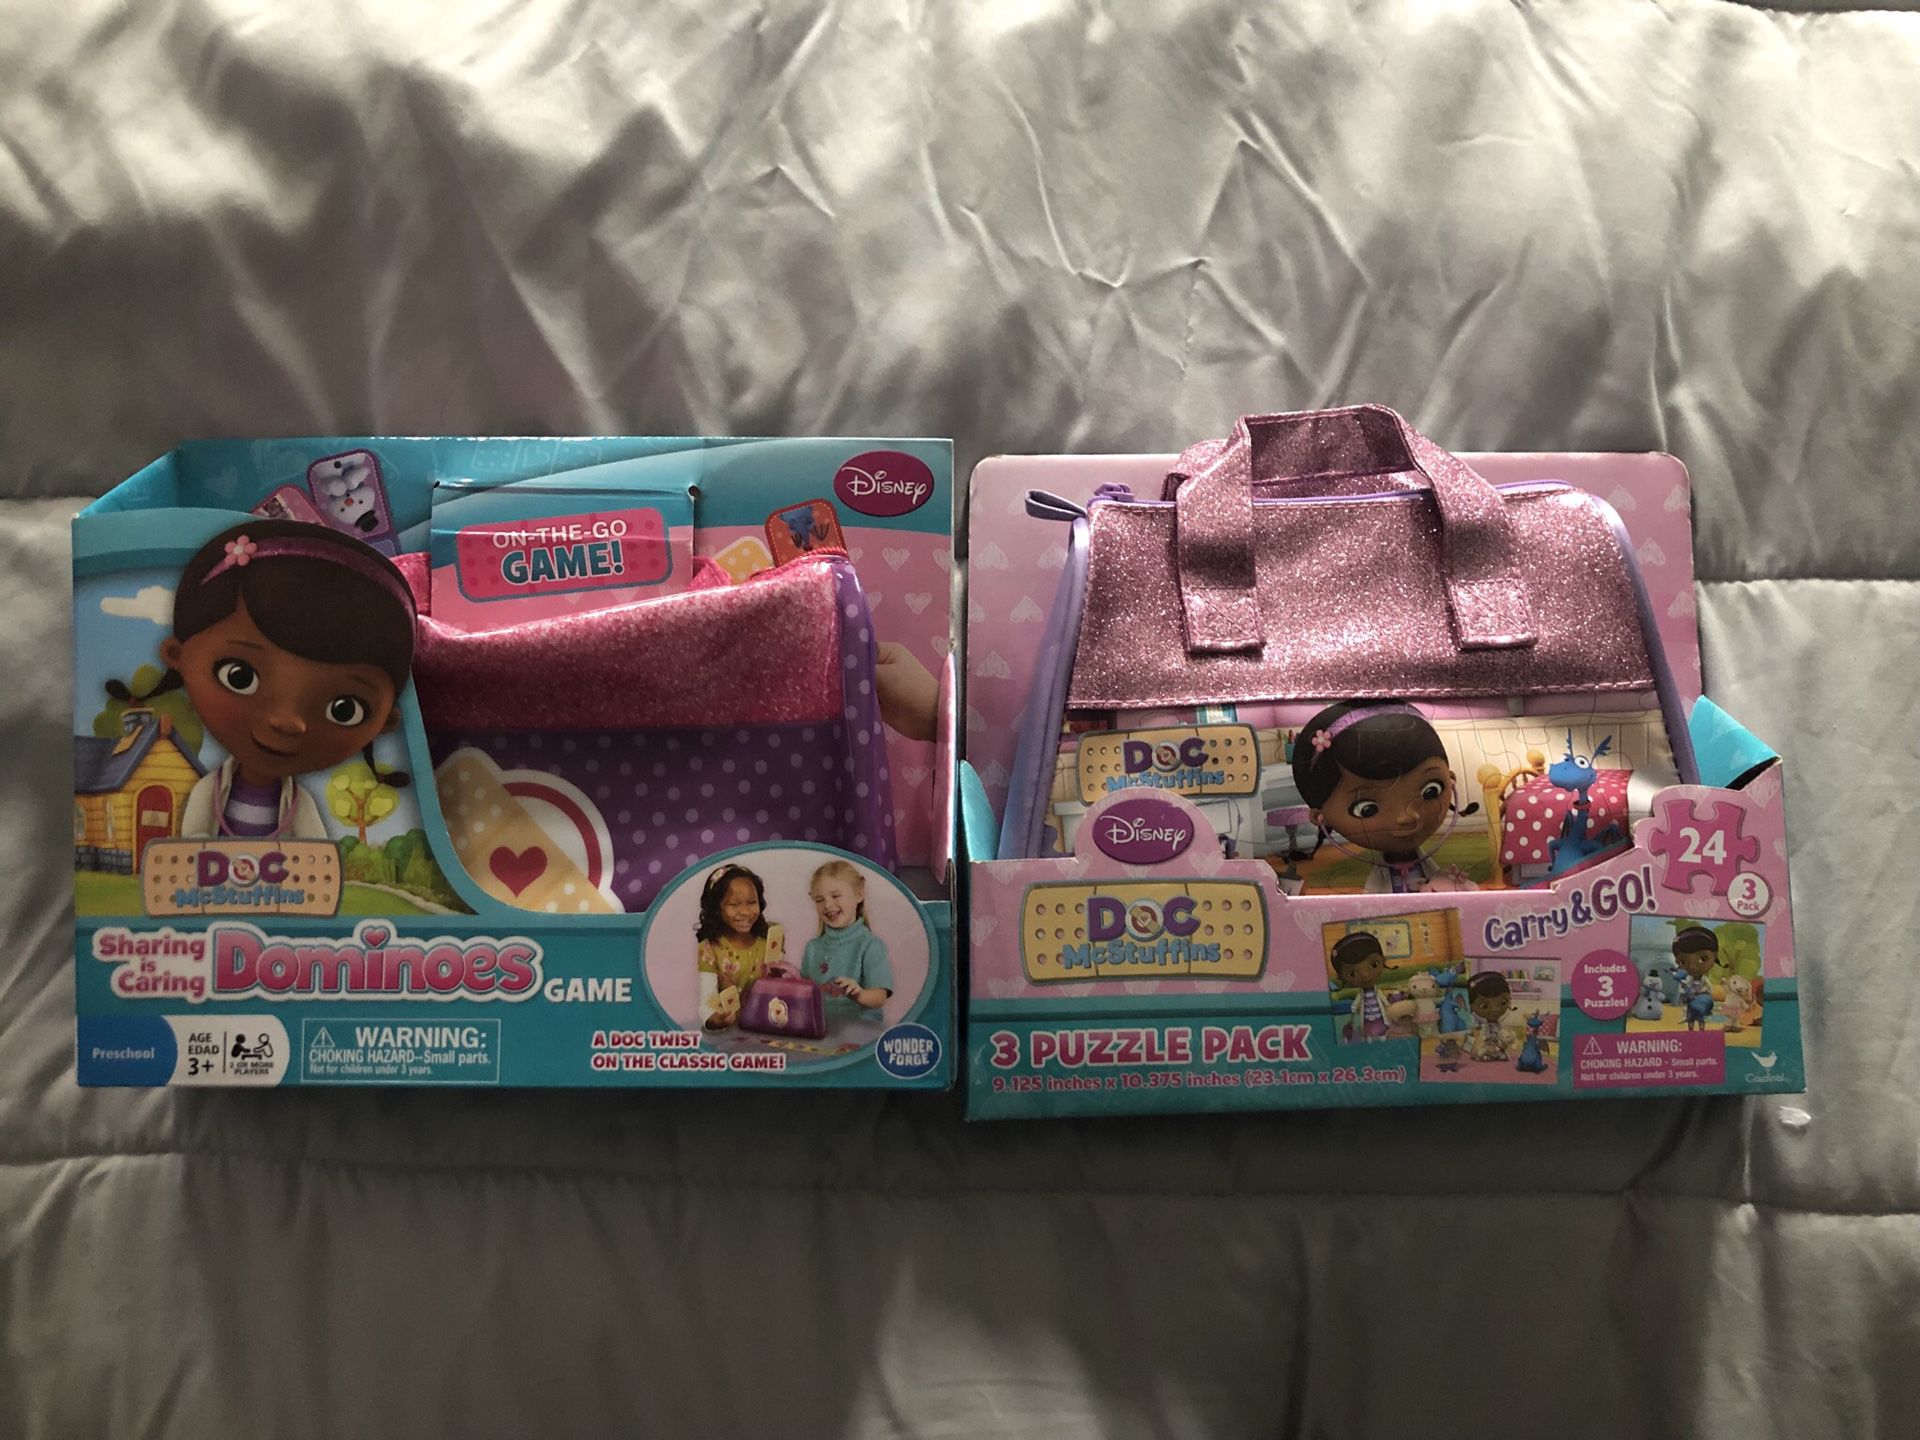 NEW Doc mcstuffins GIFT SETS. puzzles and dominoes game